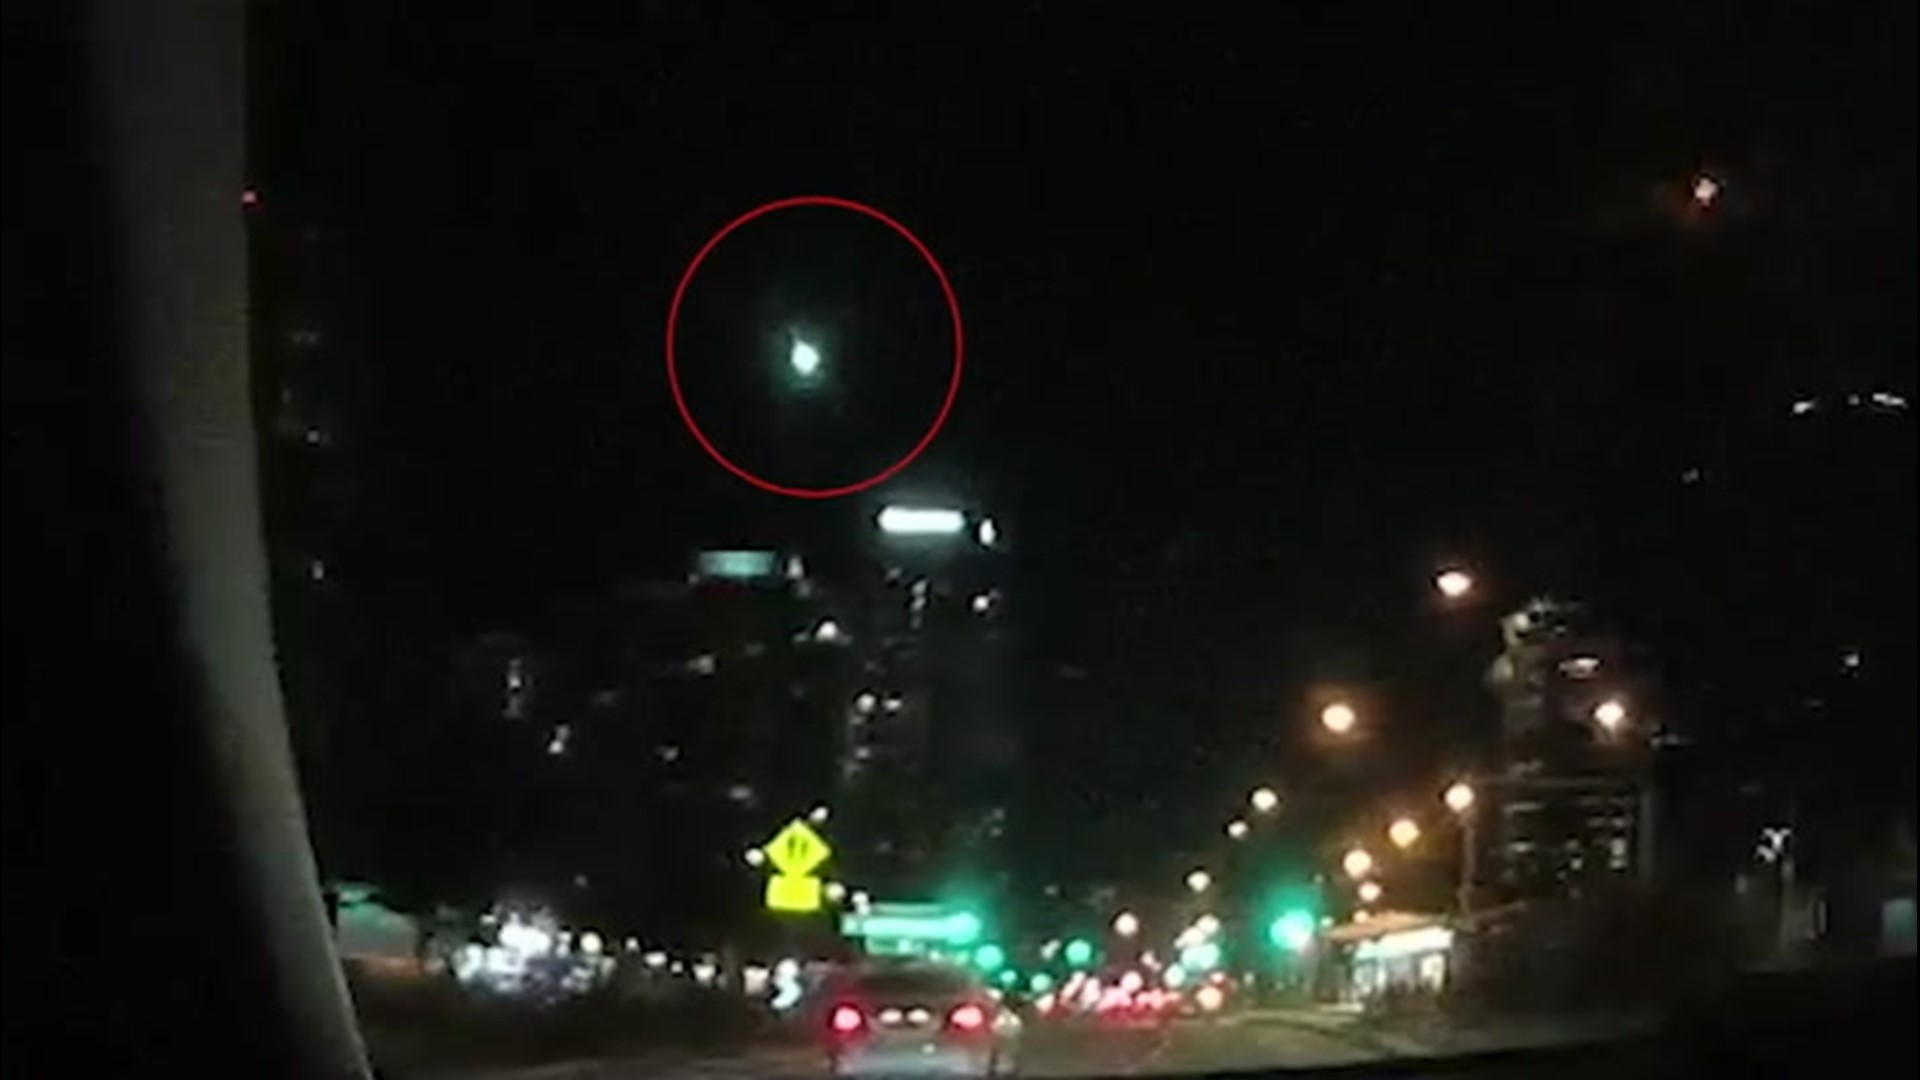 A police officer spotted a bright meteor soaring above Surfers Paradise, Queensland, in Australia. It lit up the night sky on April 19.